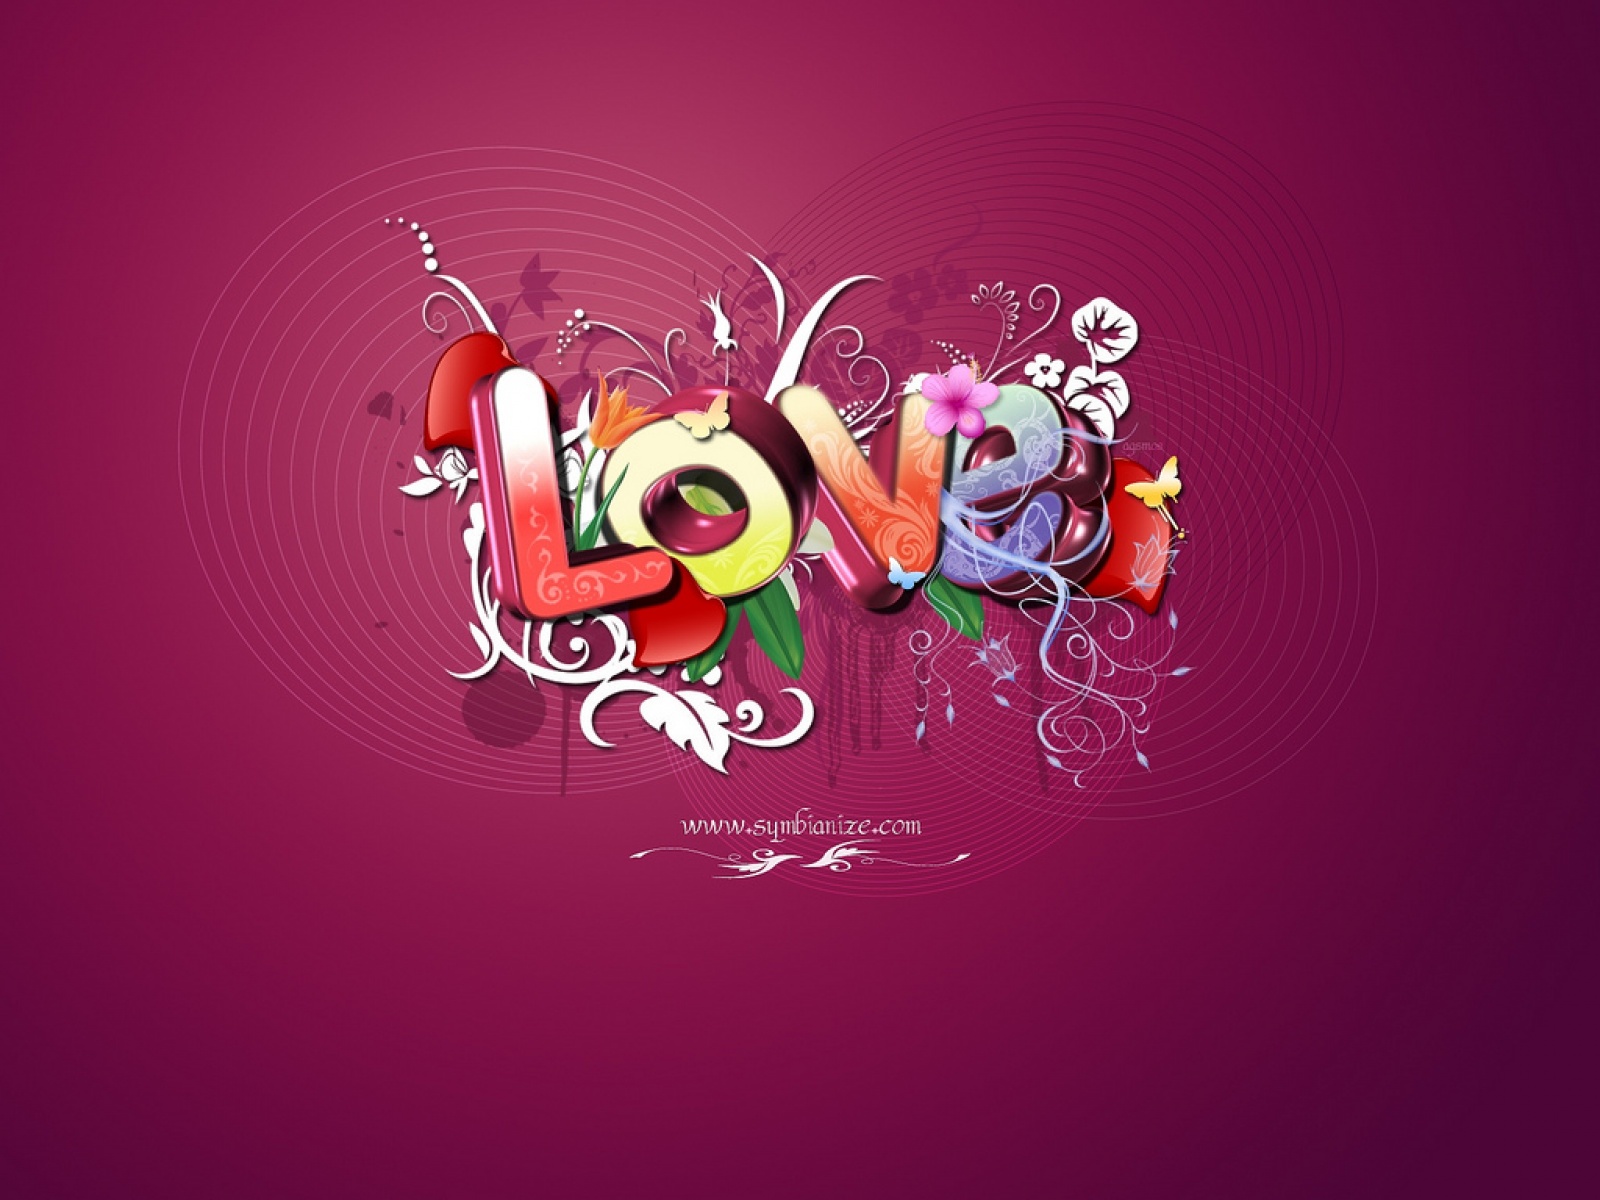 Valentines Day HD desktop backgrounds wallpapers 1600x1200